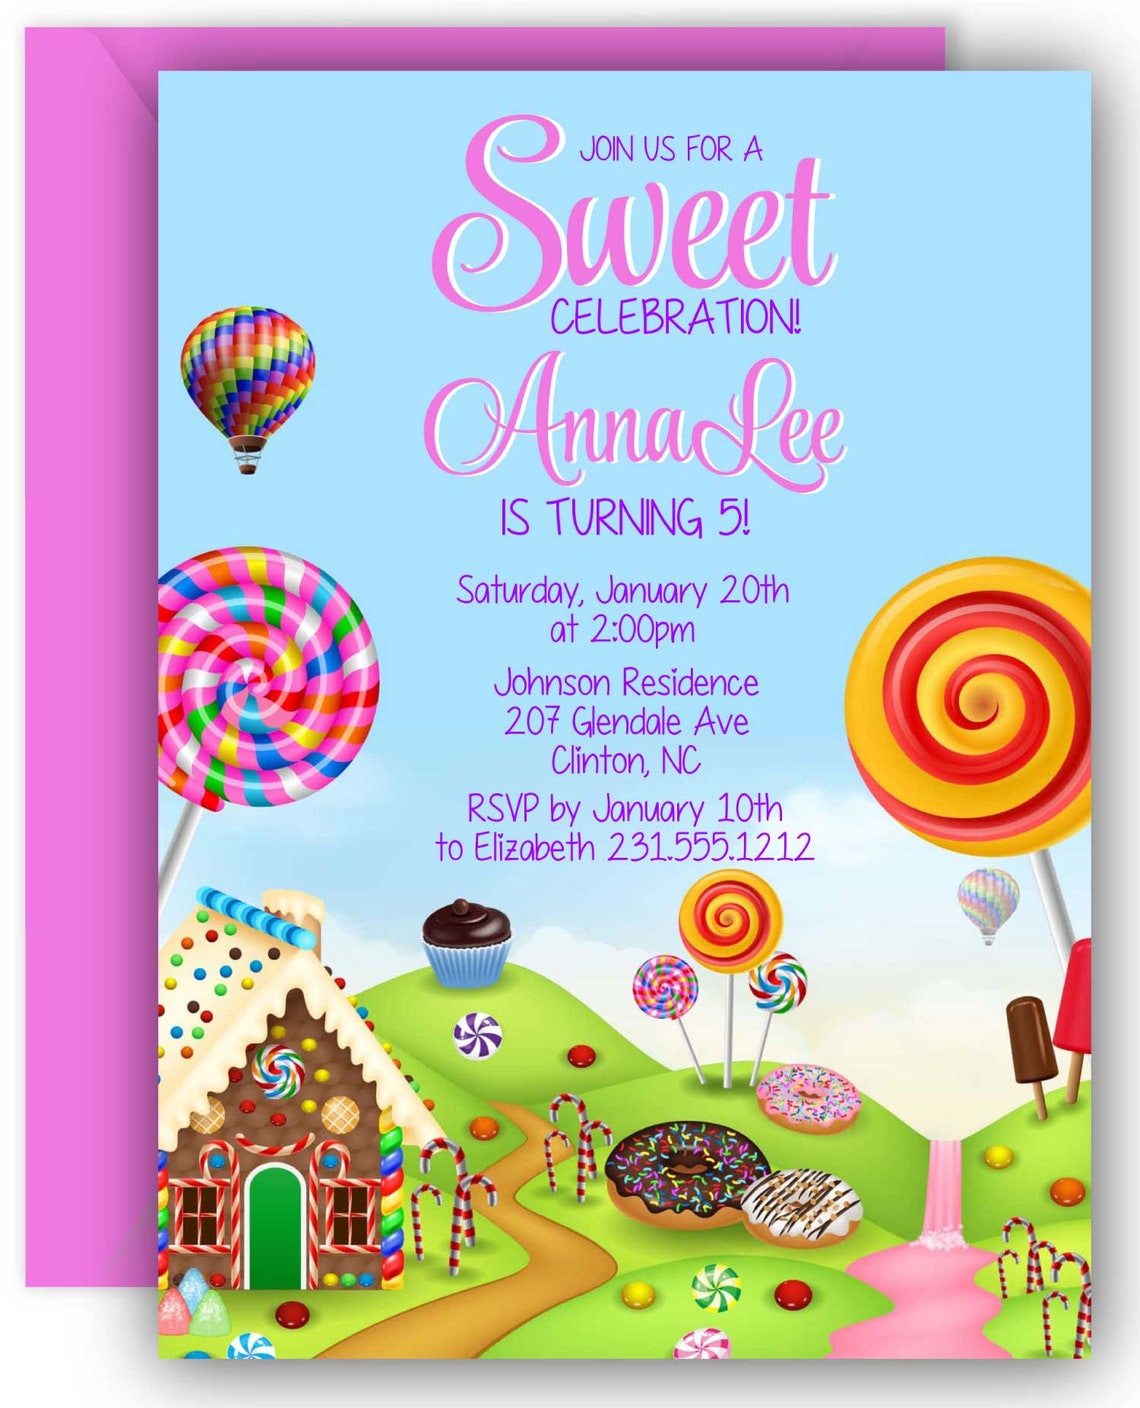 candy-land-invitations-editable-template-candyland-sweets-etsy